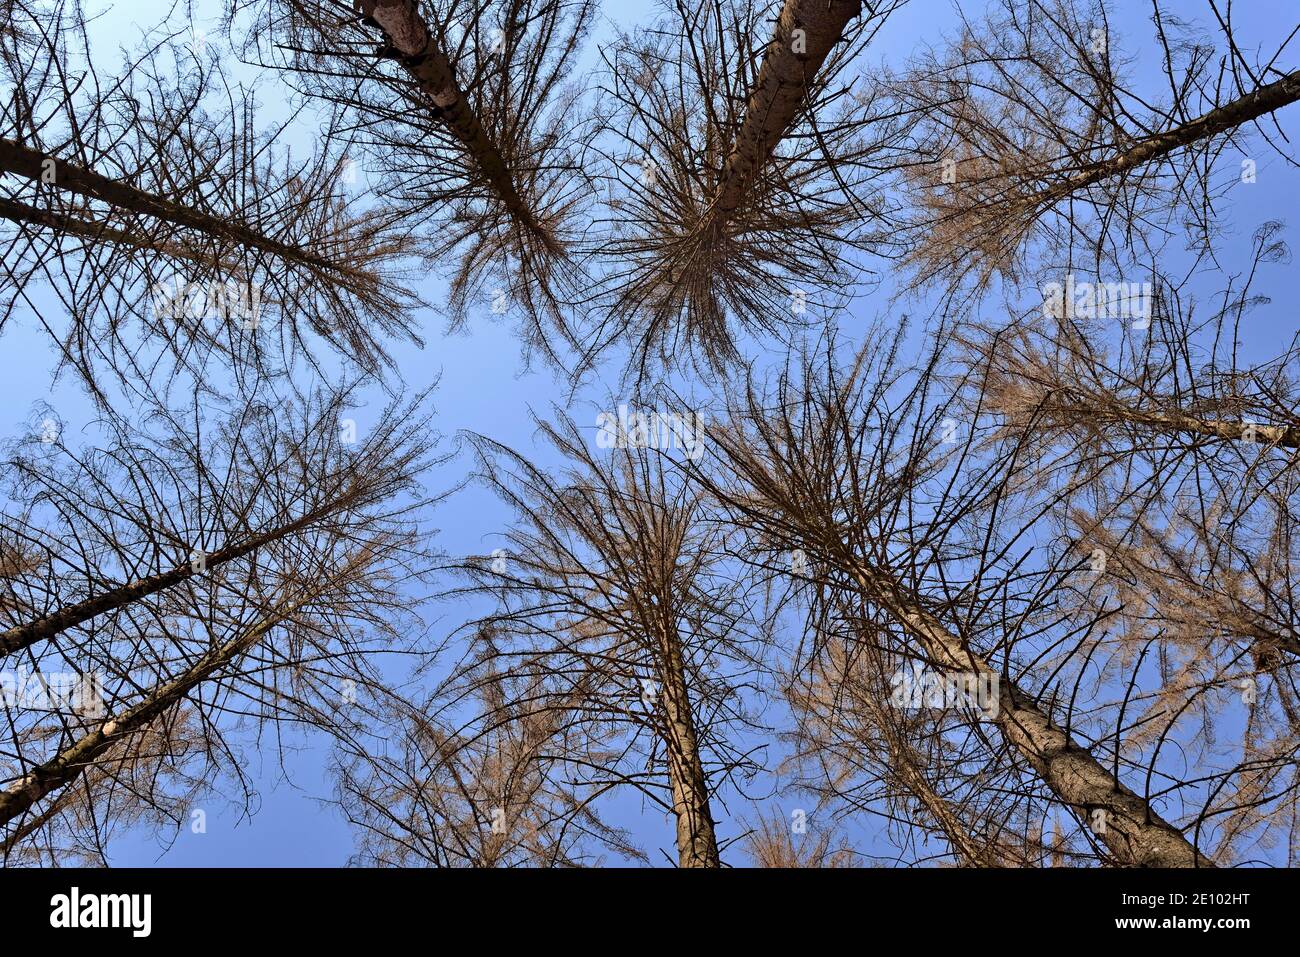 Spruce (Picea abies), view into the treetops, dead trees due to bark beetle infestation and drought, blue sky, Arnsberger Wald nature park Park, North Stock Photo